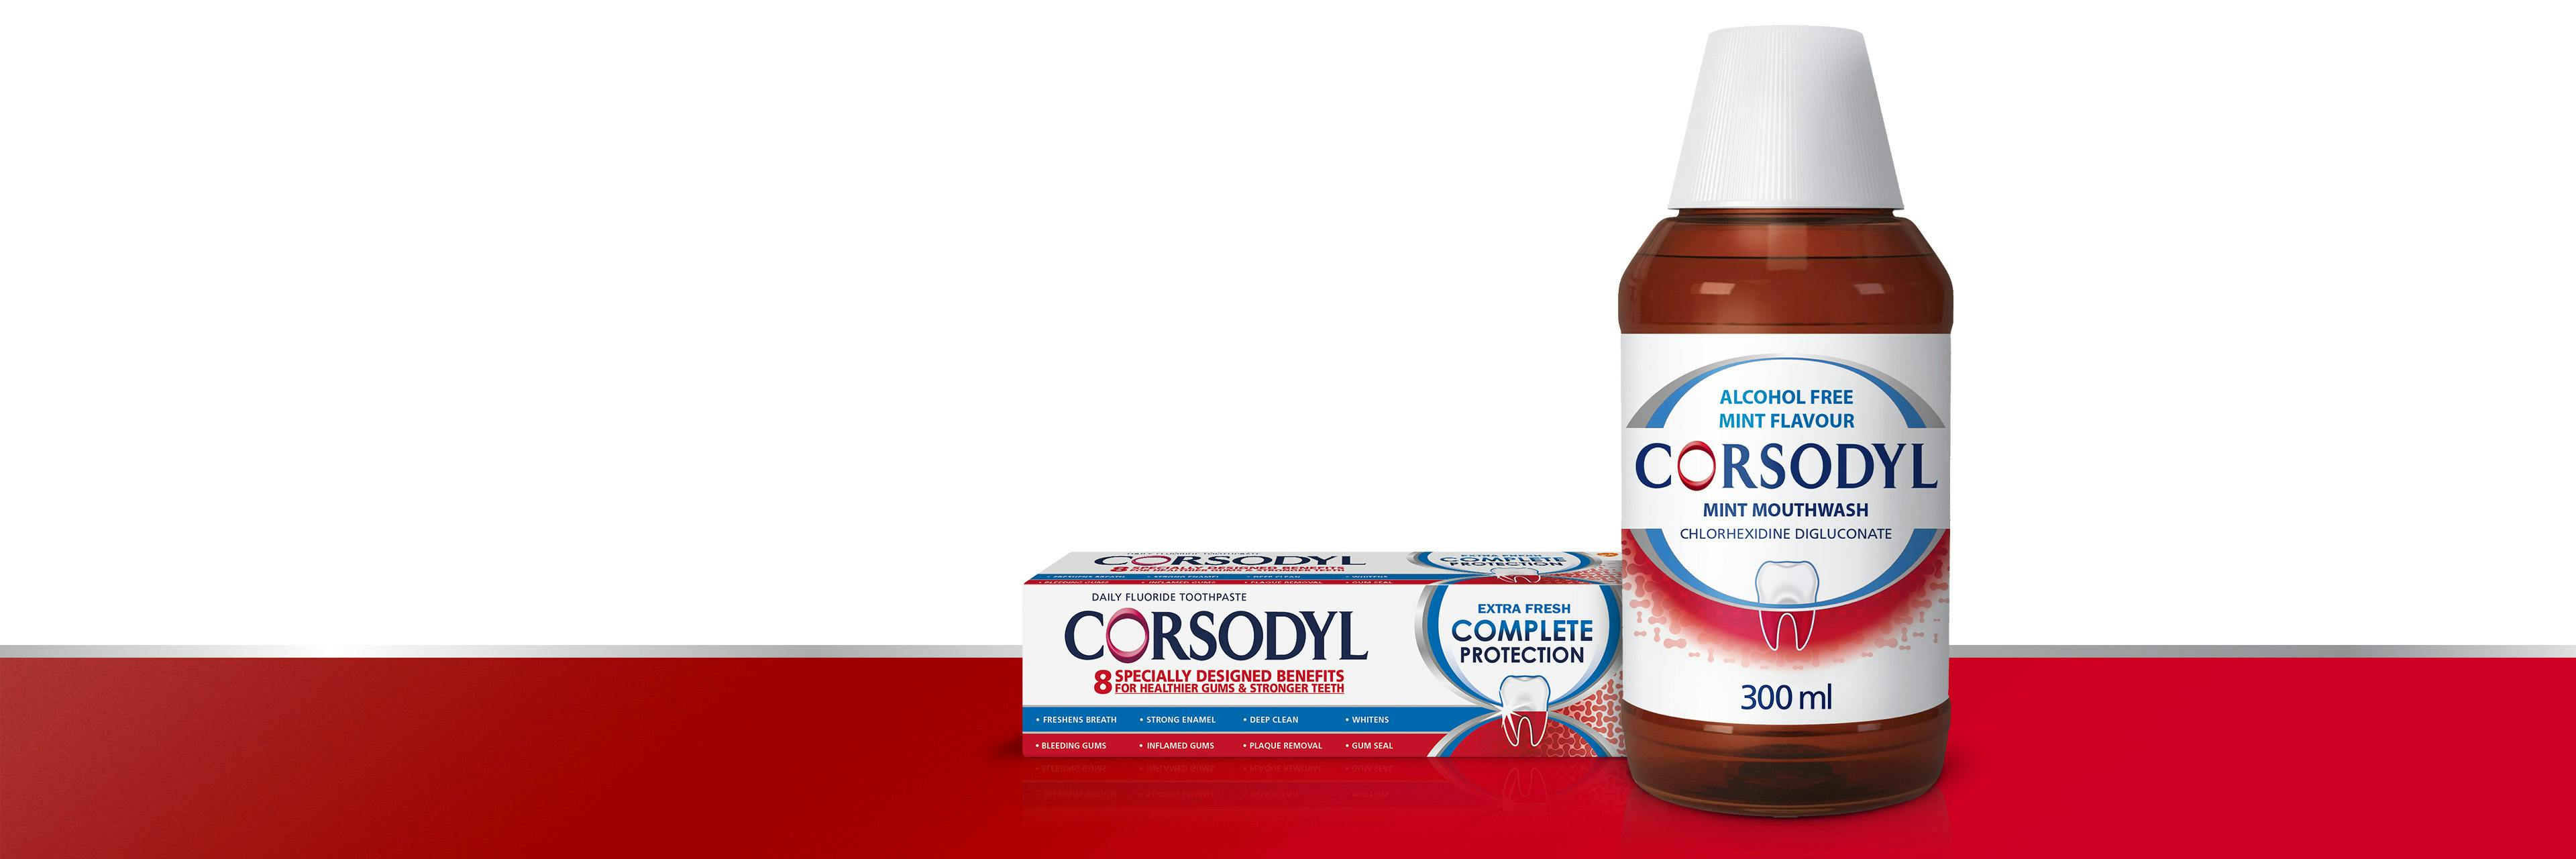 parodontax Daily Original toothpaste and Corsodyl Intensive Treatment alcohol free mouthwash